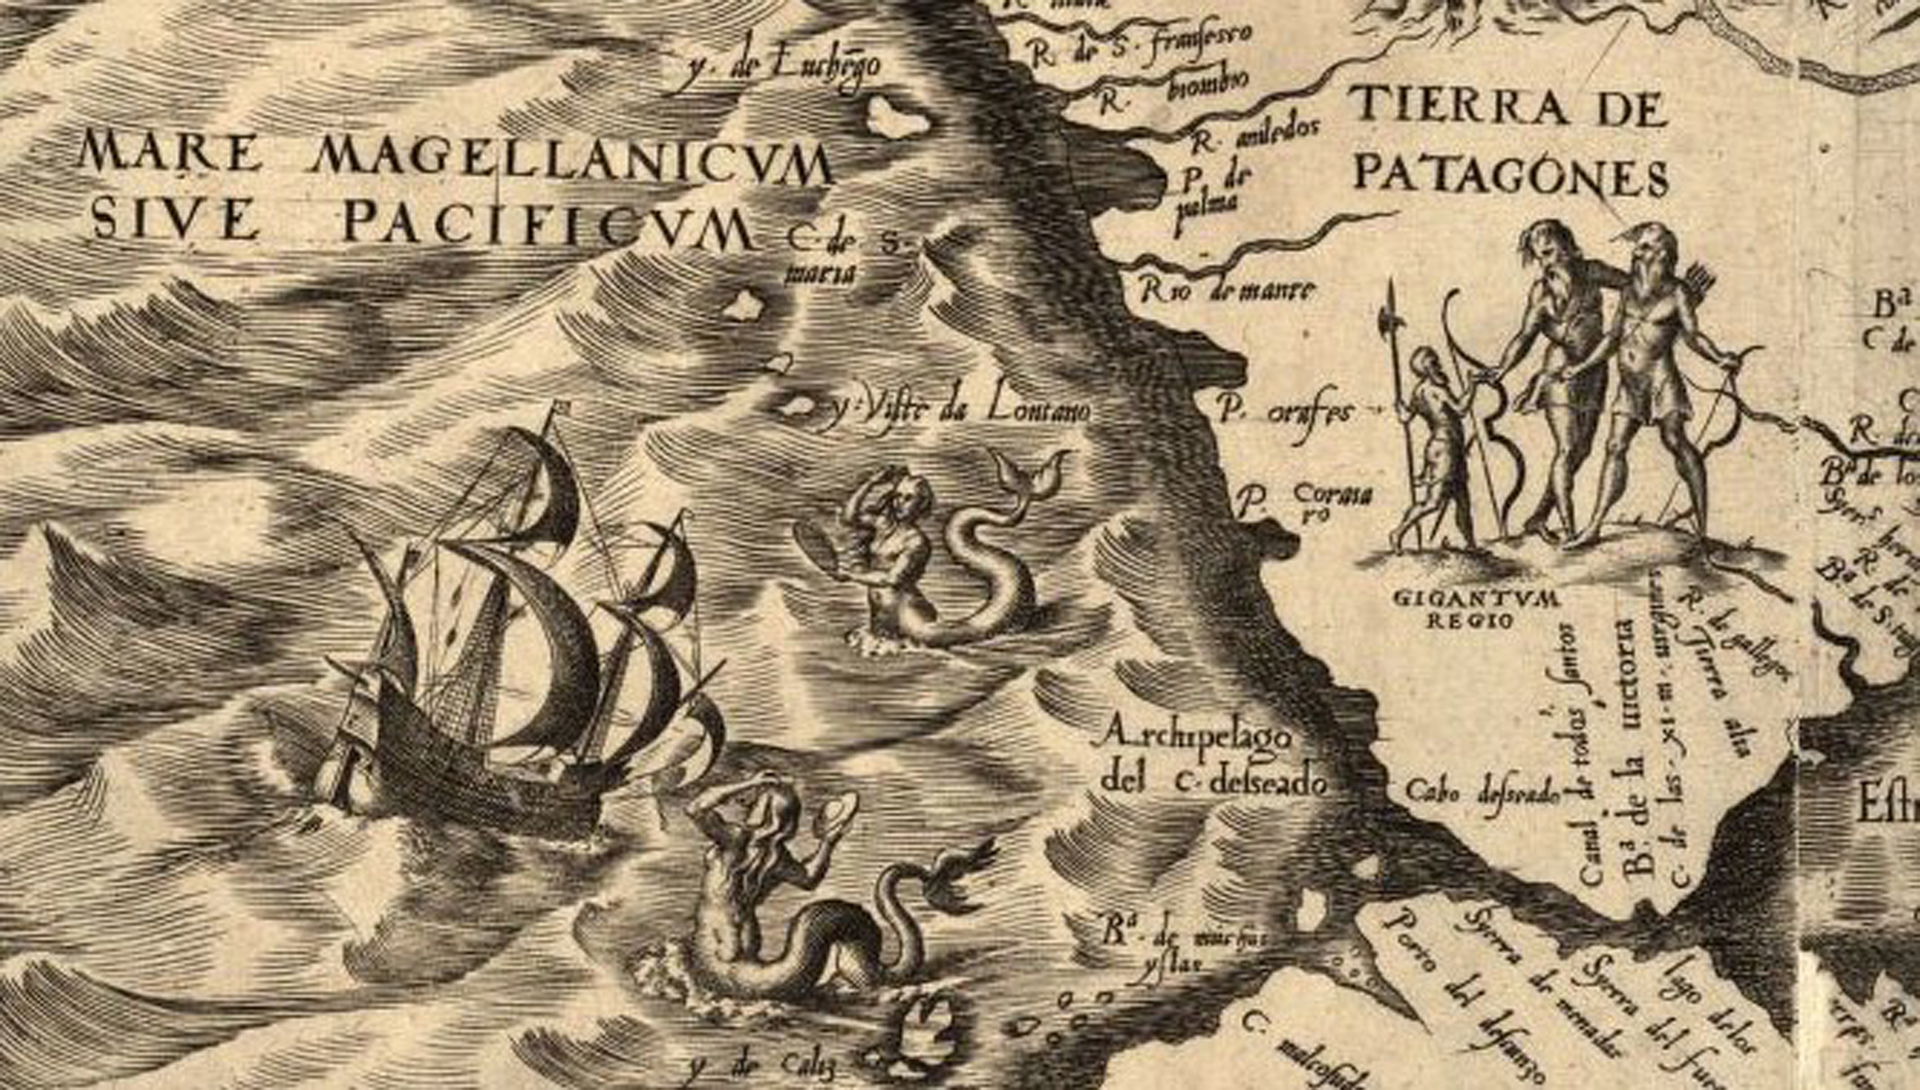 The Territories They Knew From The Perspective Of Magellan And His Men